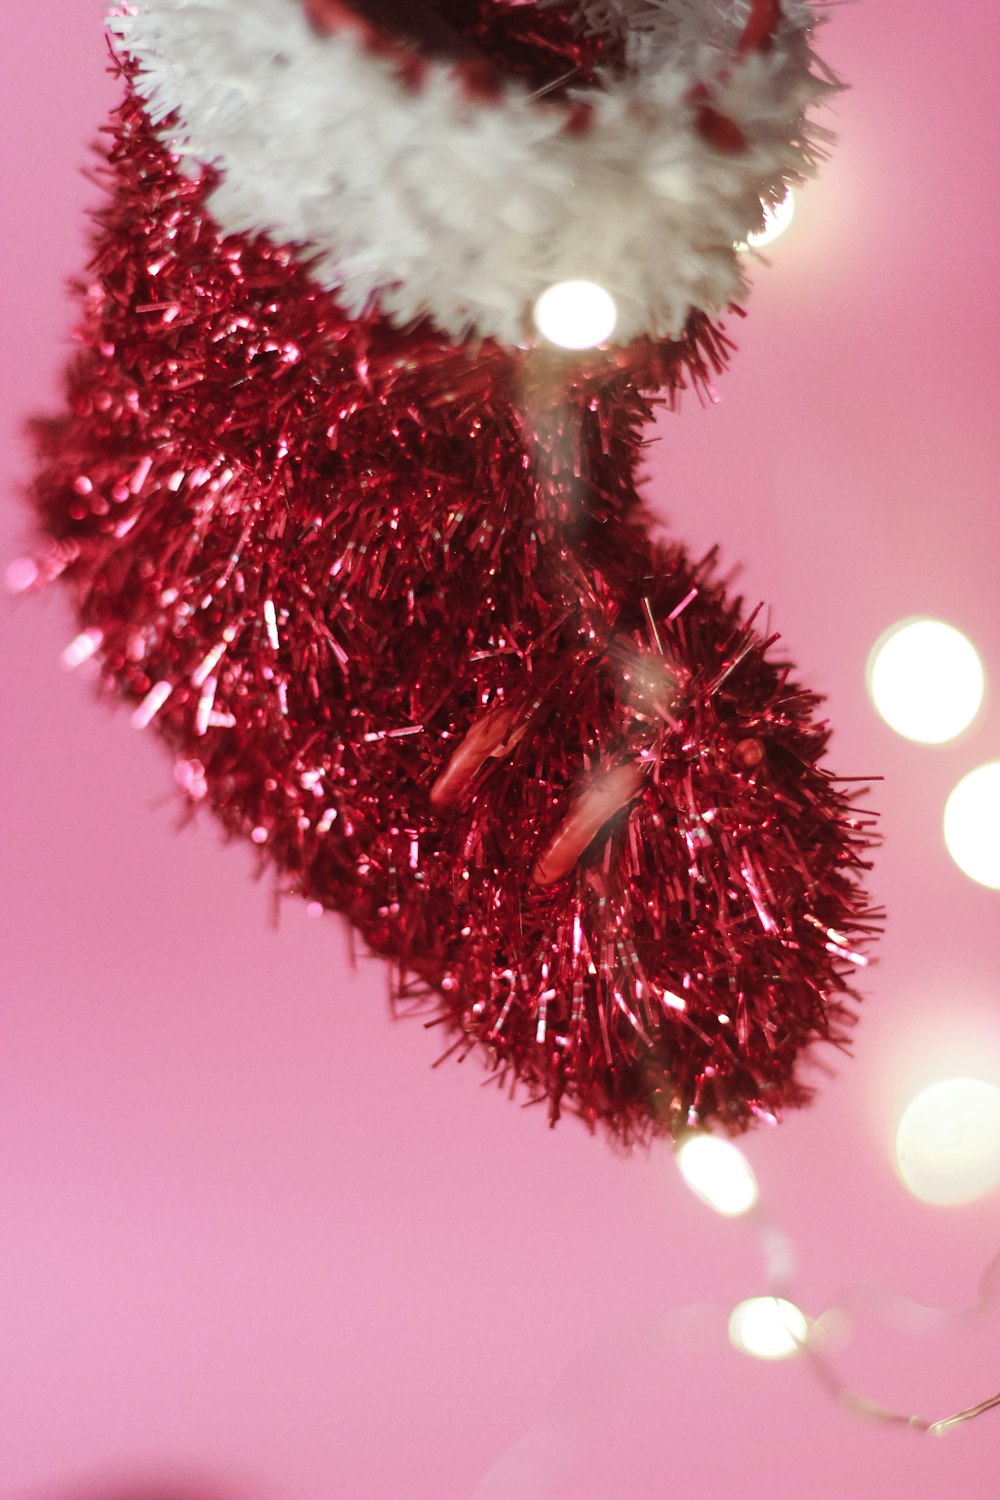 red and white fur ball ornament